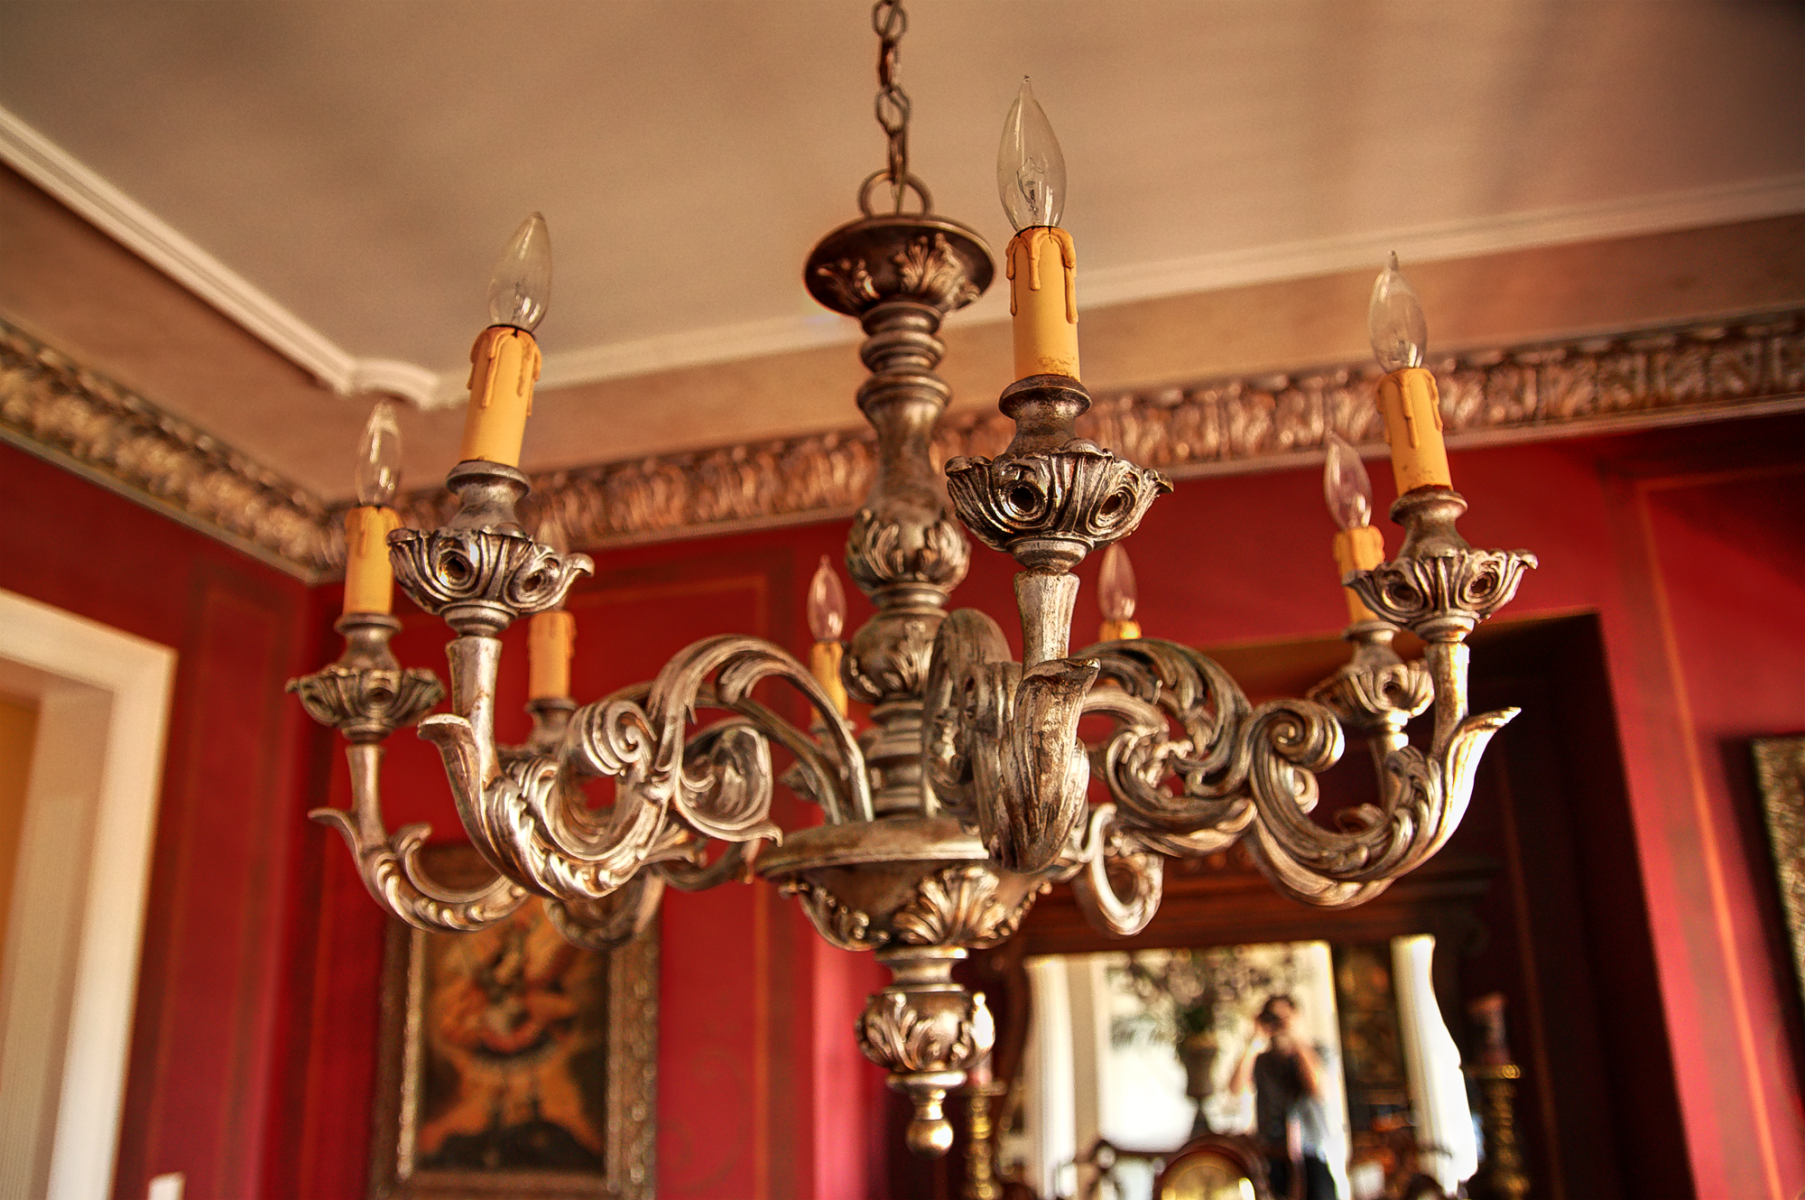 Chandelier design change finished:  from its previous garish gold to this beautiful gilt and antique silver look.